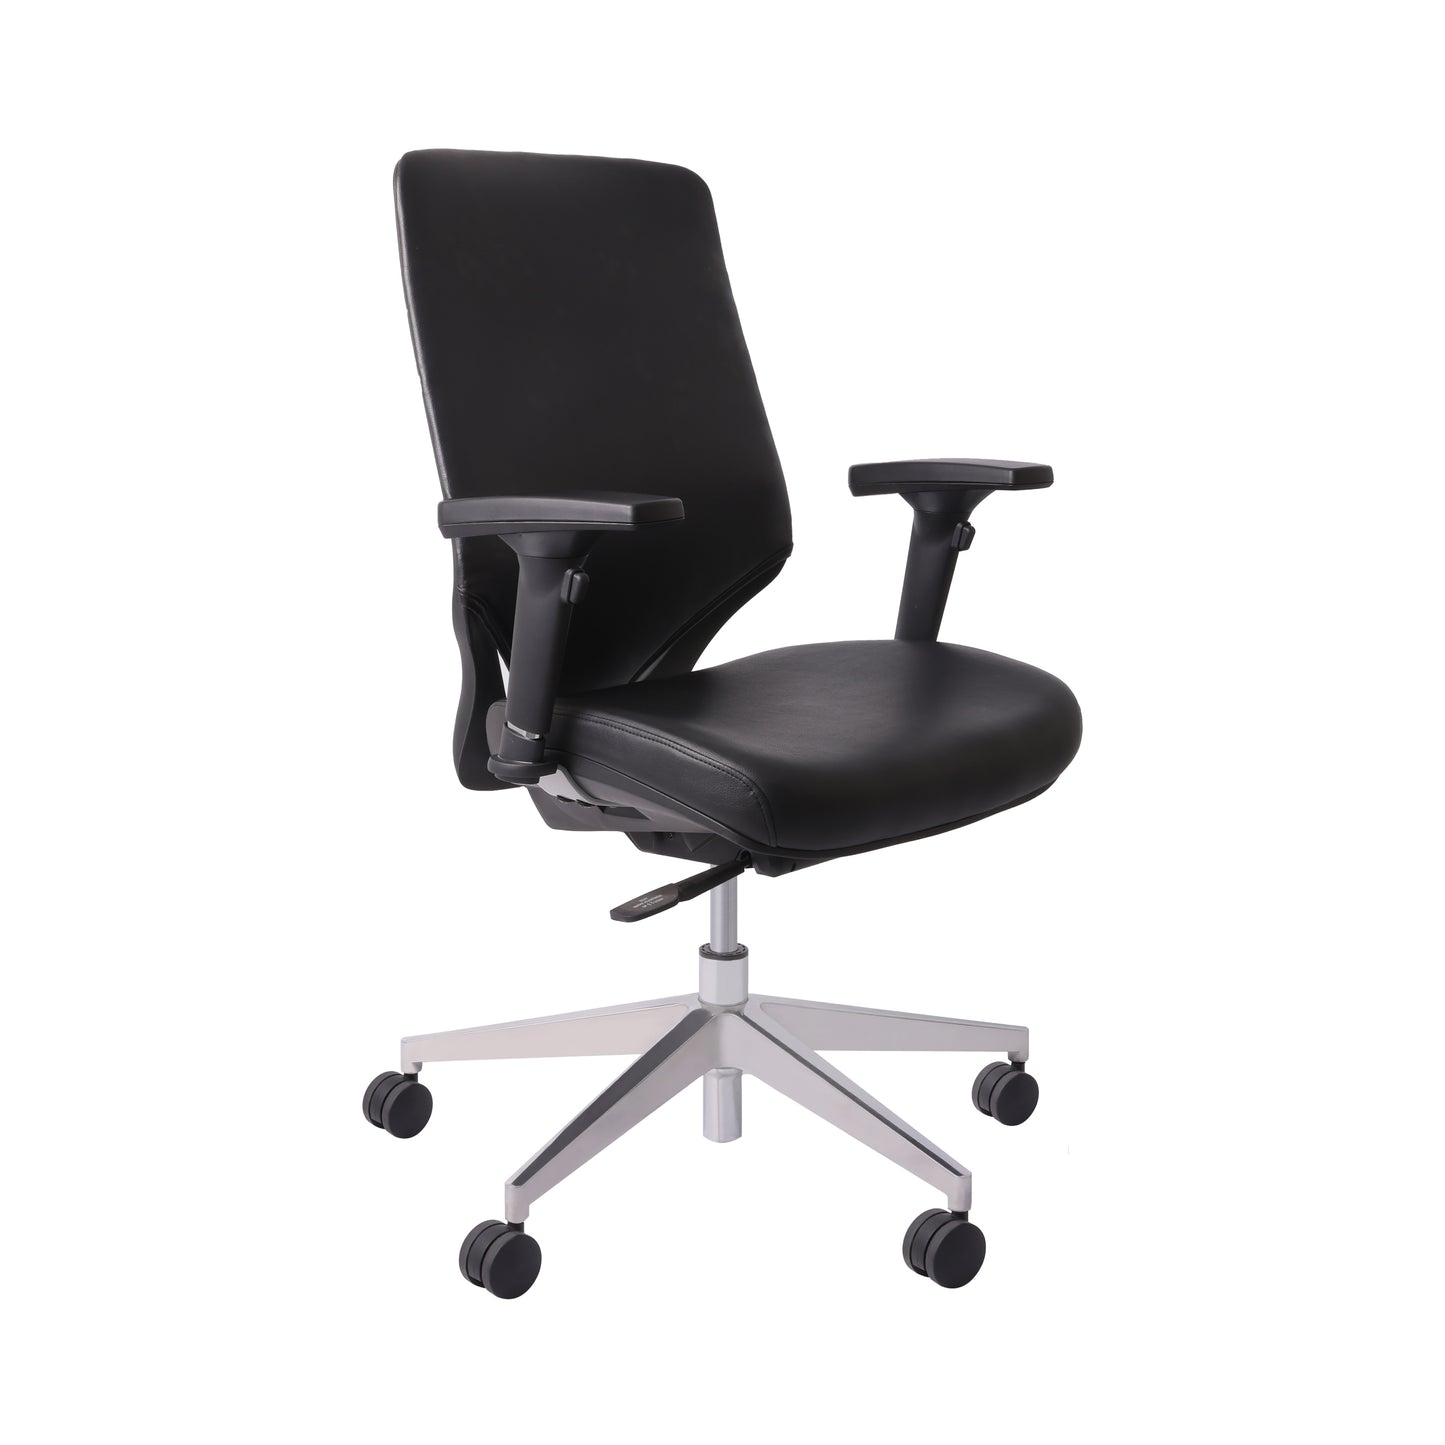 Oama High Back Office Chair with Armrests